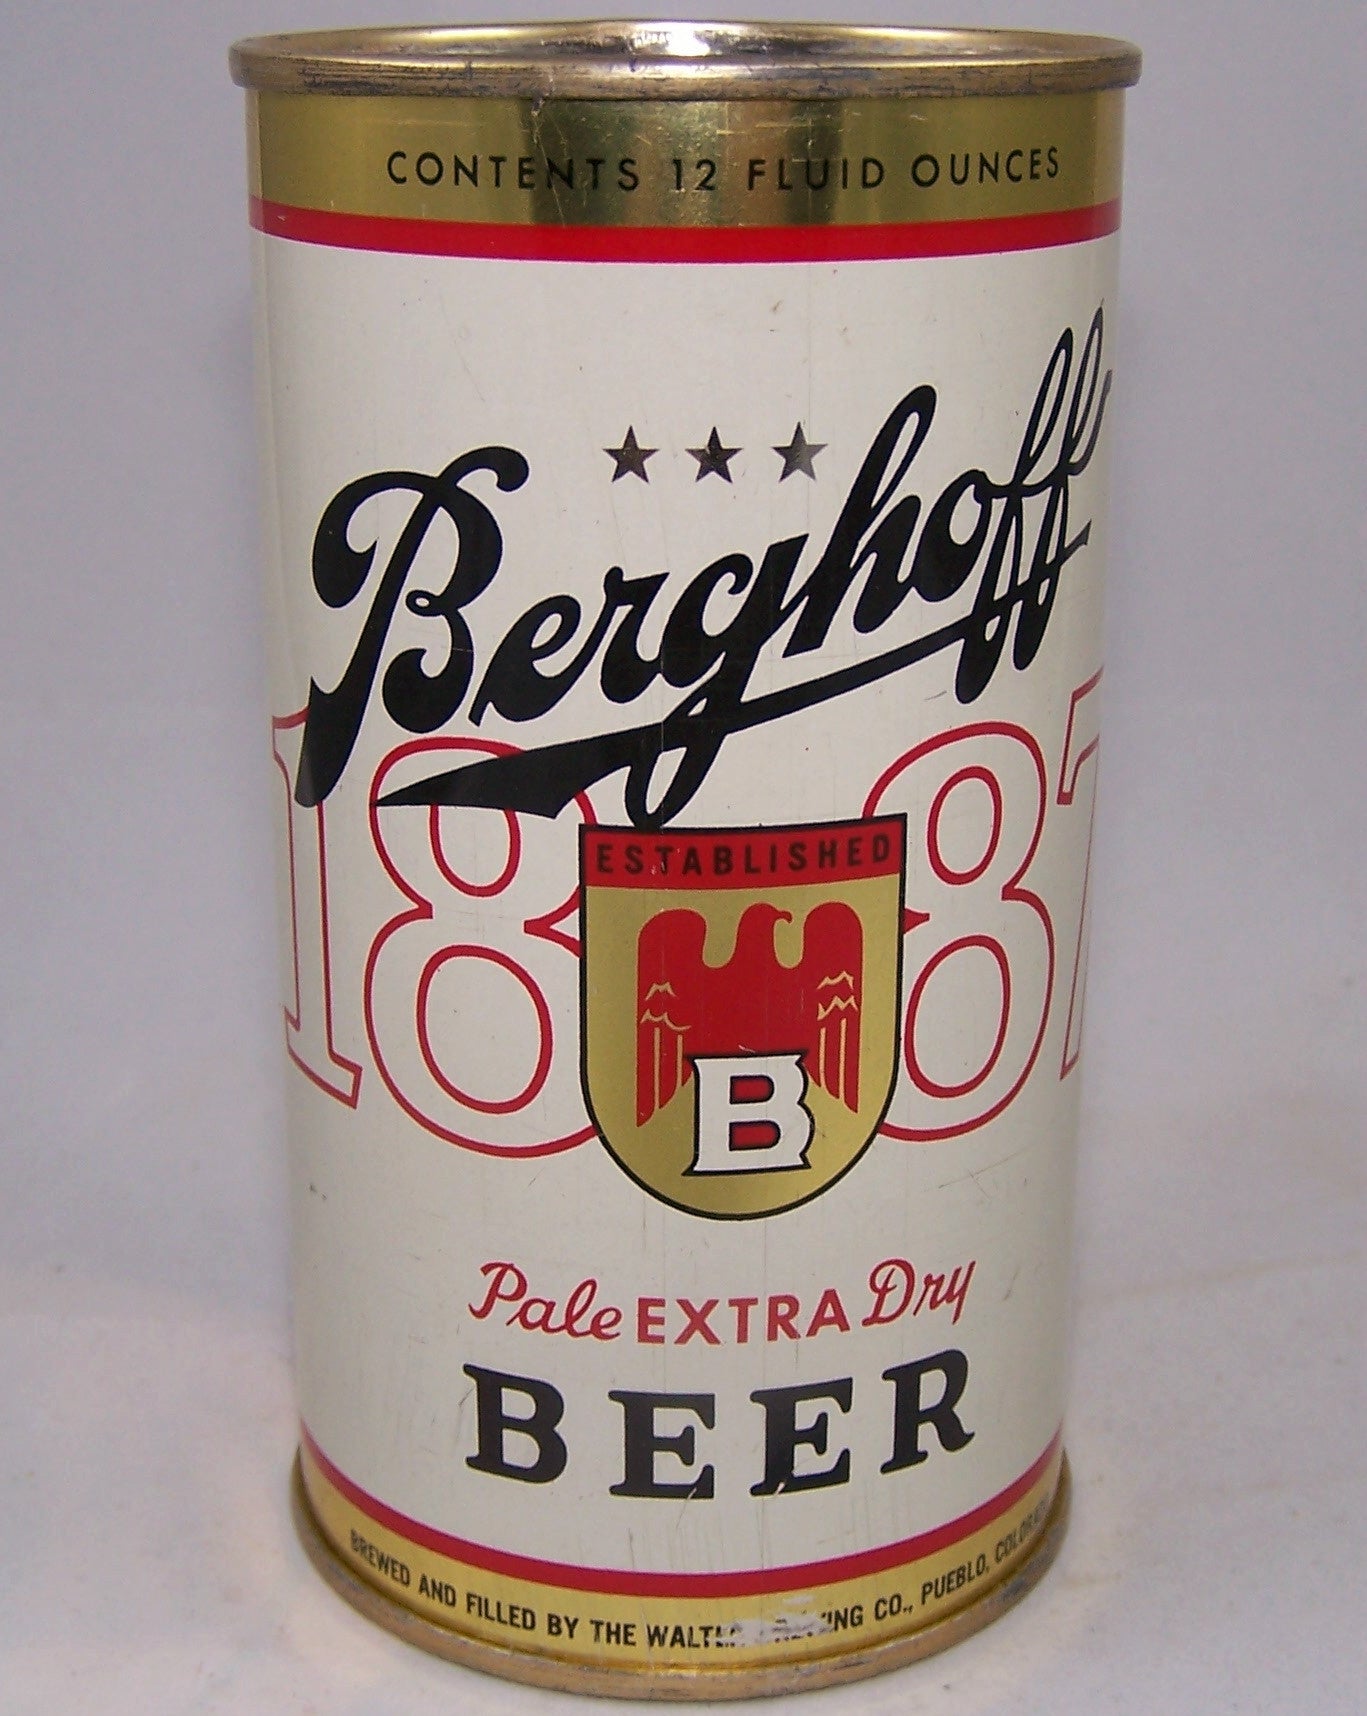 Berghoff Pale Extra Dry Beer, USBC 36-04, Grade 1/1+ Sold on 12/29/16